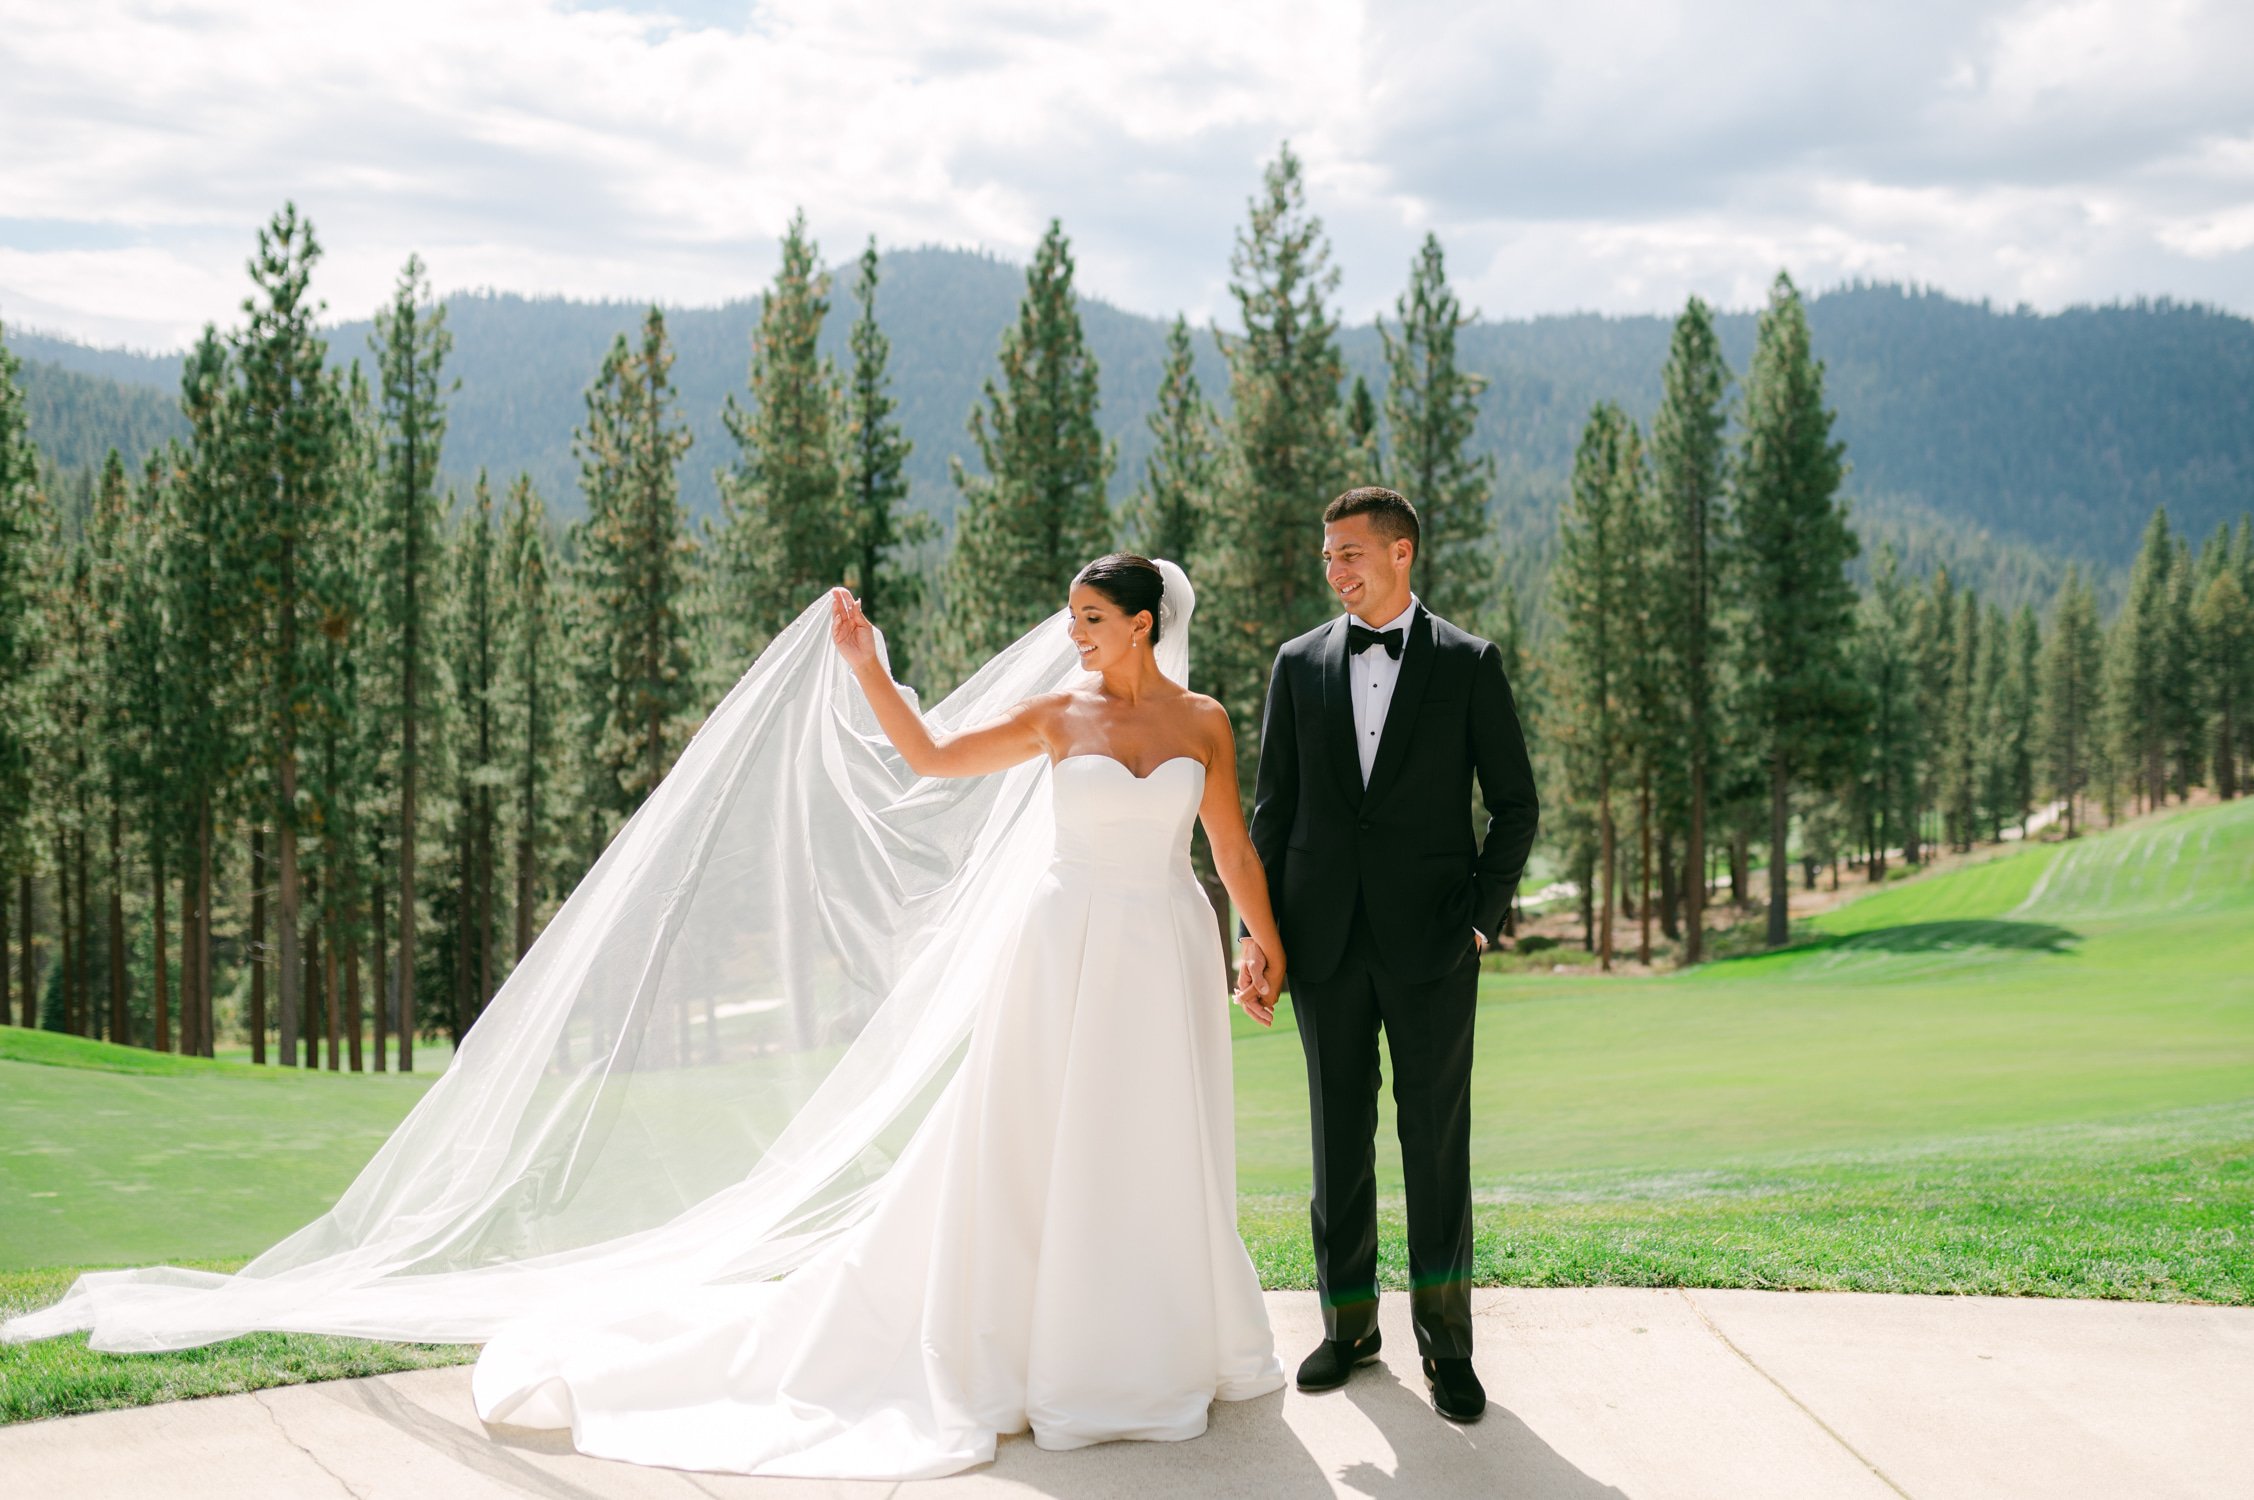 Martis Camp Wedding, photo of the couple against the tall trees, bride holding her veil